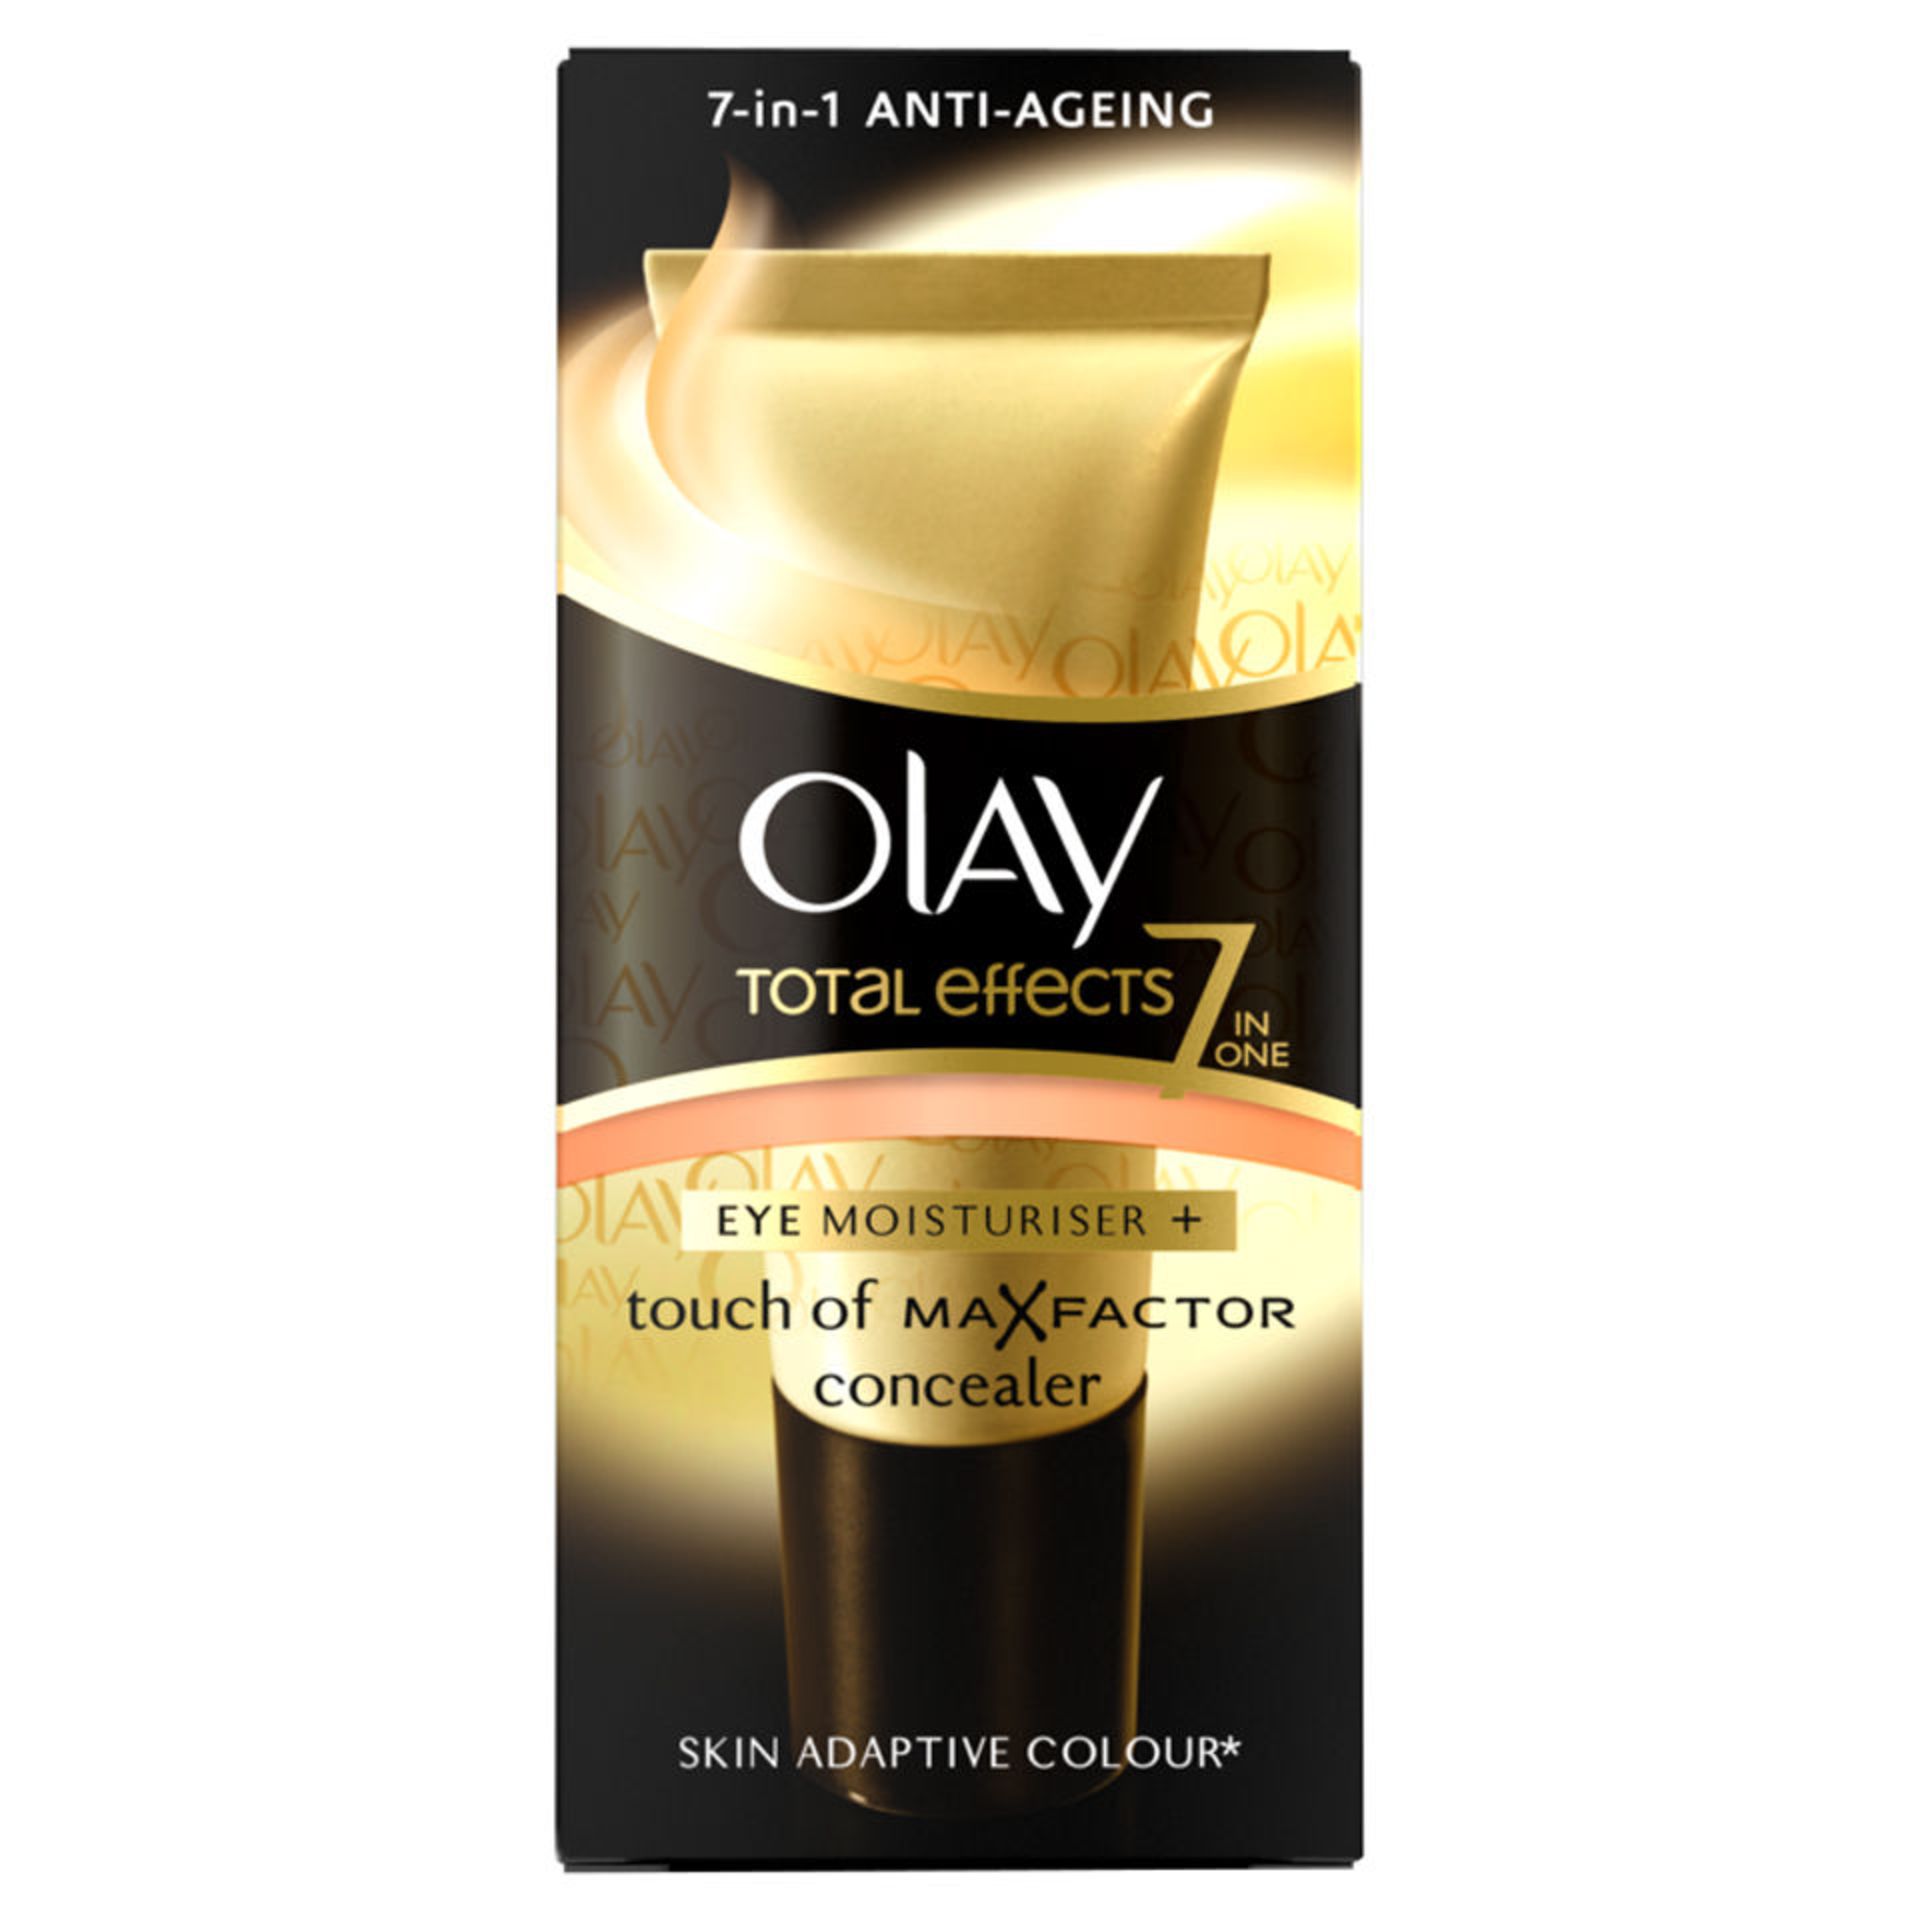 V *TRADE QTY* Brand New Olay Total Effects 7-In-1 Eye Moisturiser + Touch Of MaXfactor Concealer